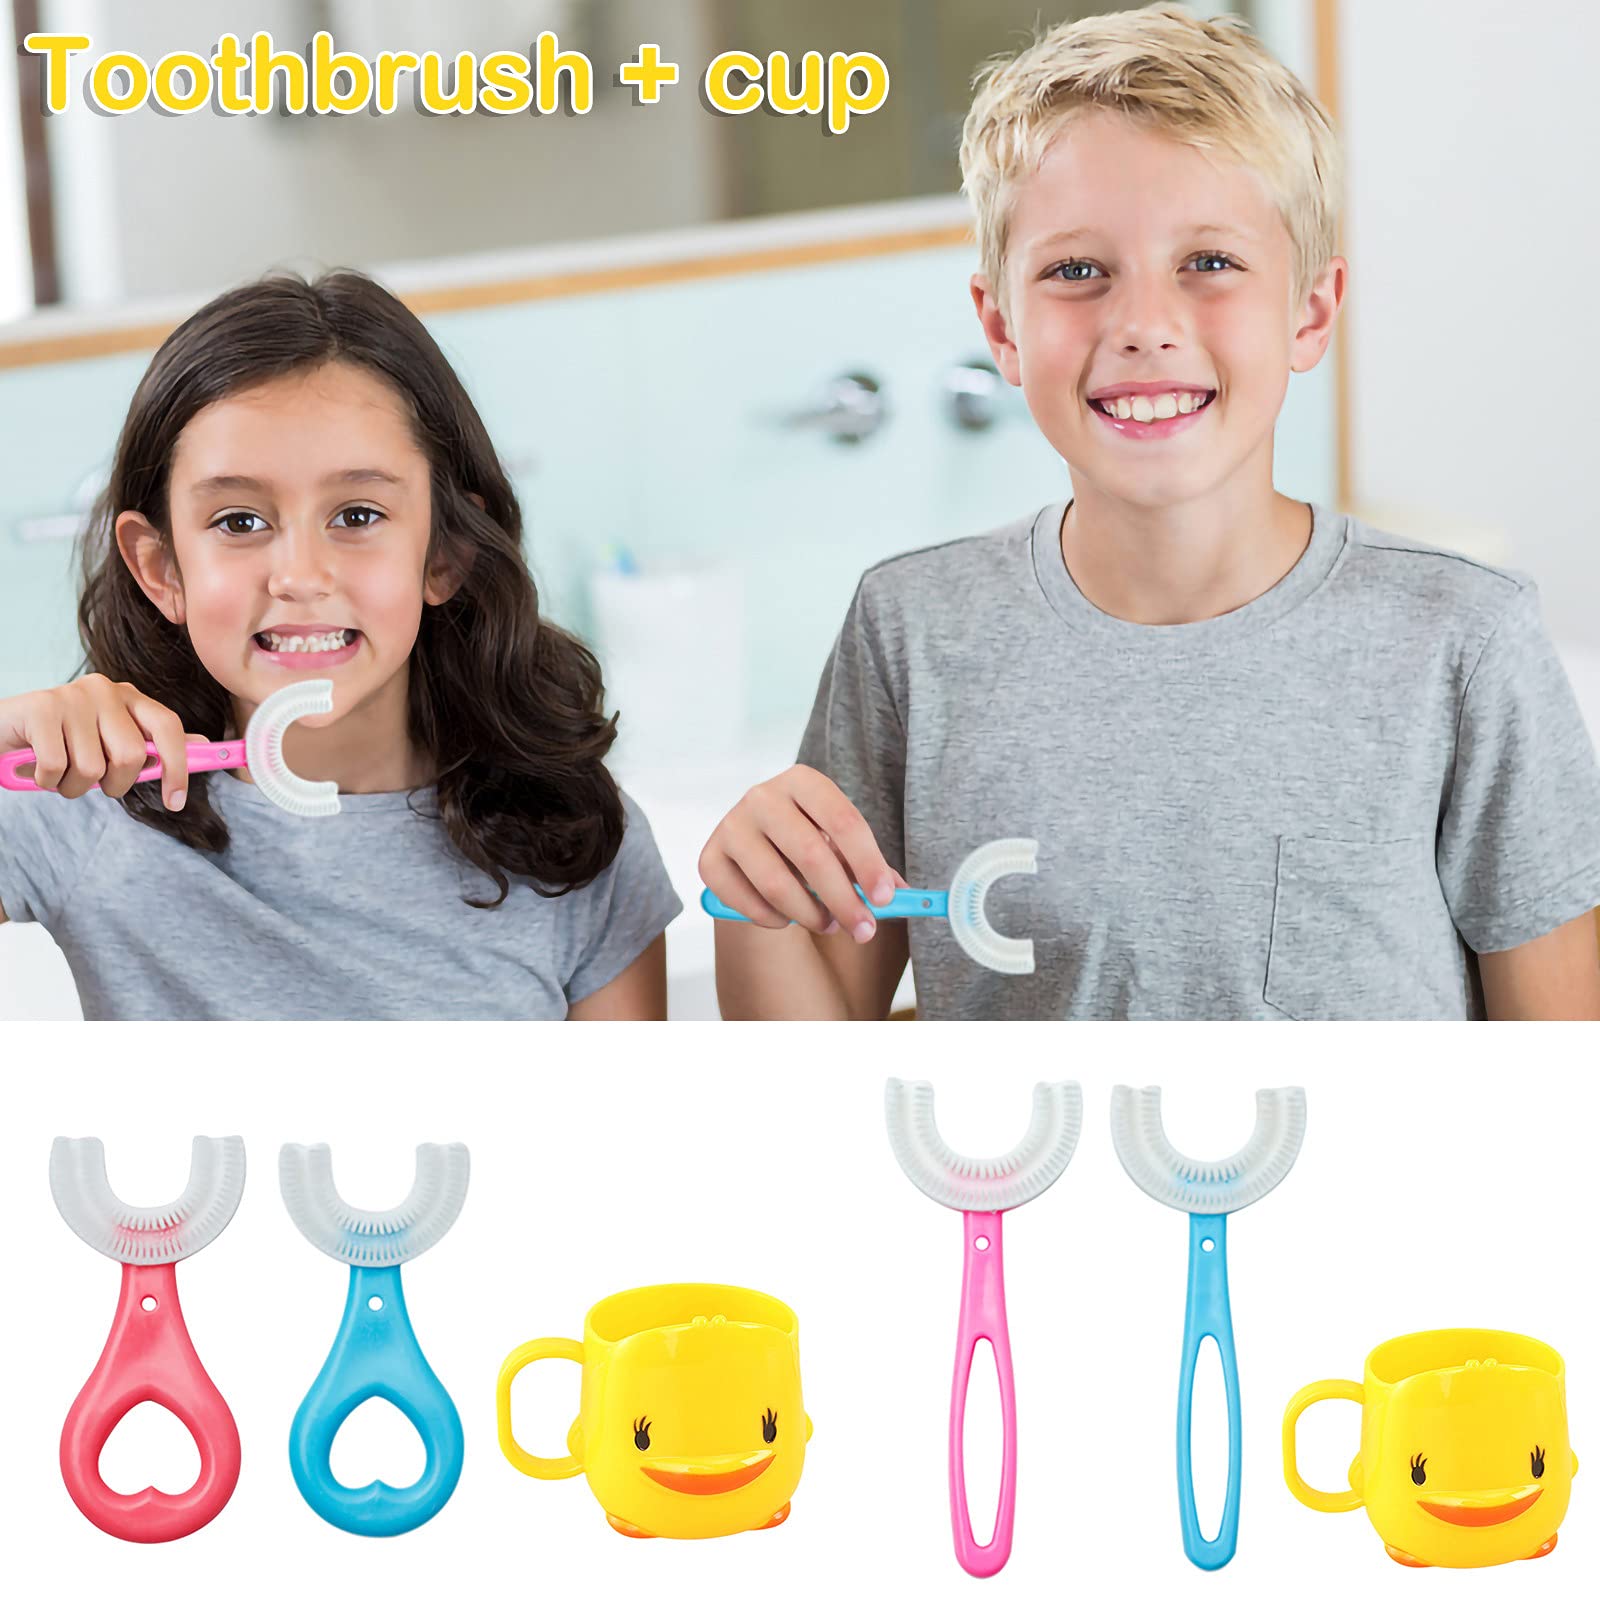 Goaupin 2 Pcs U-Shaped Manual Toothbrush for Kids(2-12Year), with a Toothbrushing Cup, U-Shape Portable Baby Food Grade Silicone Toothbrush ,Special Design for Toddlers/Children (B-2Pcs)